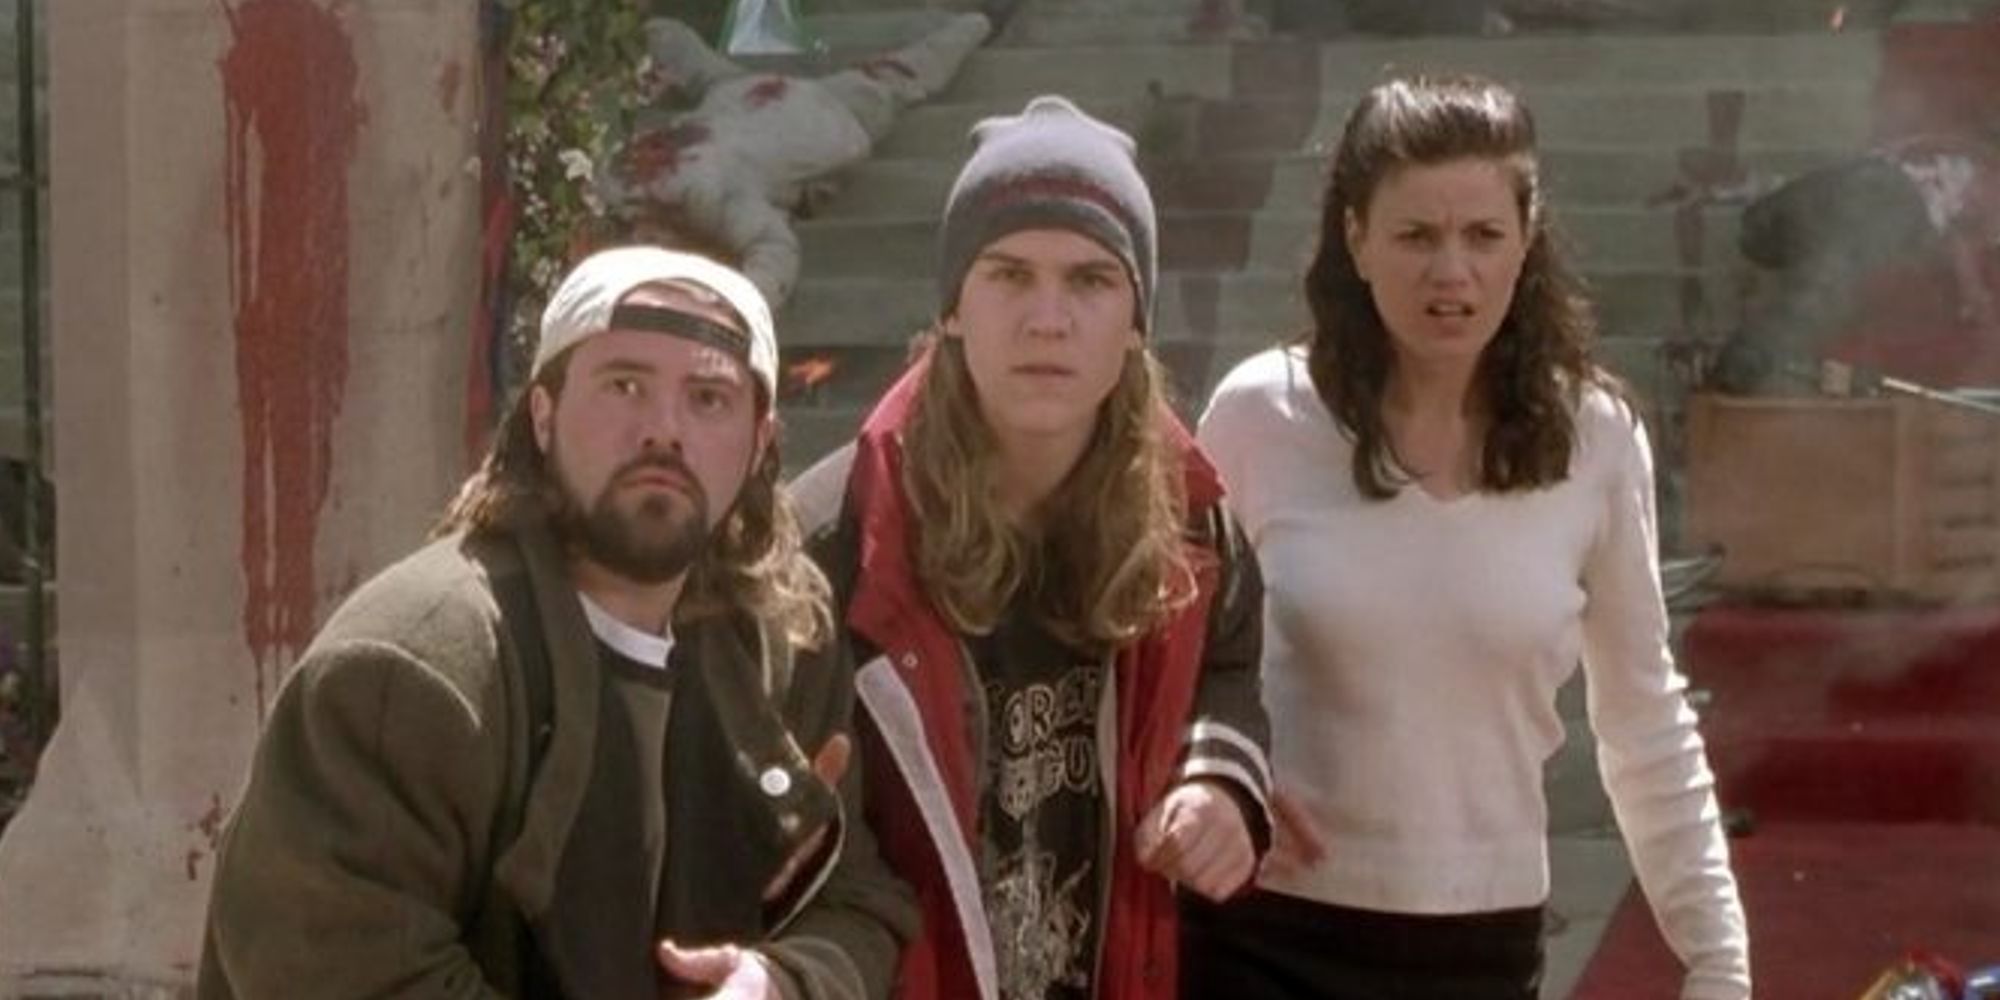 Dogma final battle with Kevin Smith, Jason Mewes, and Linda Fiorentino as Silent Bob, Jay and Bethany